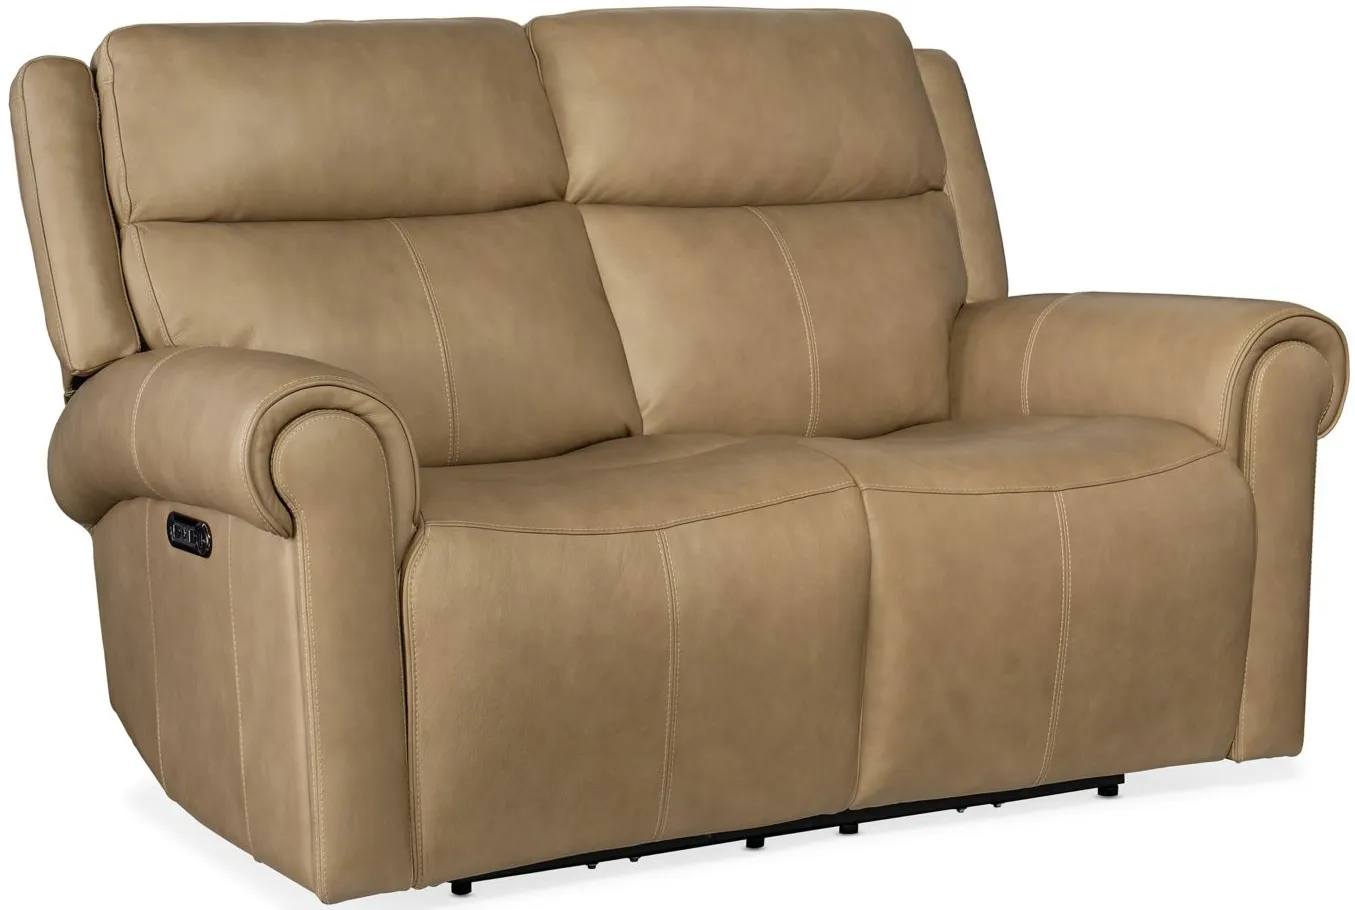 Oberon Zero Gravity Power Loveseat with Power Headrest in Caruso Sand by Hooker Furniture